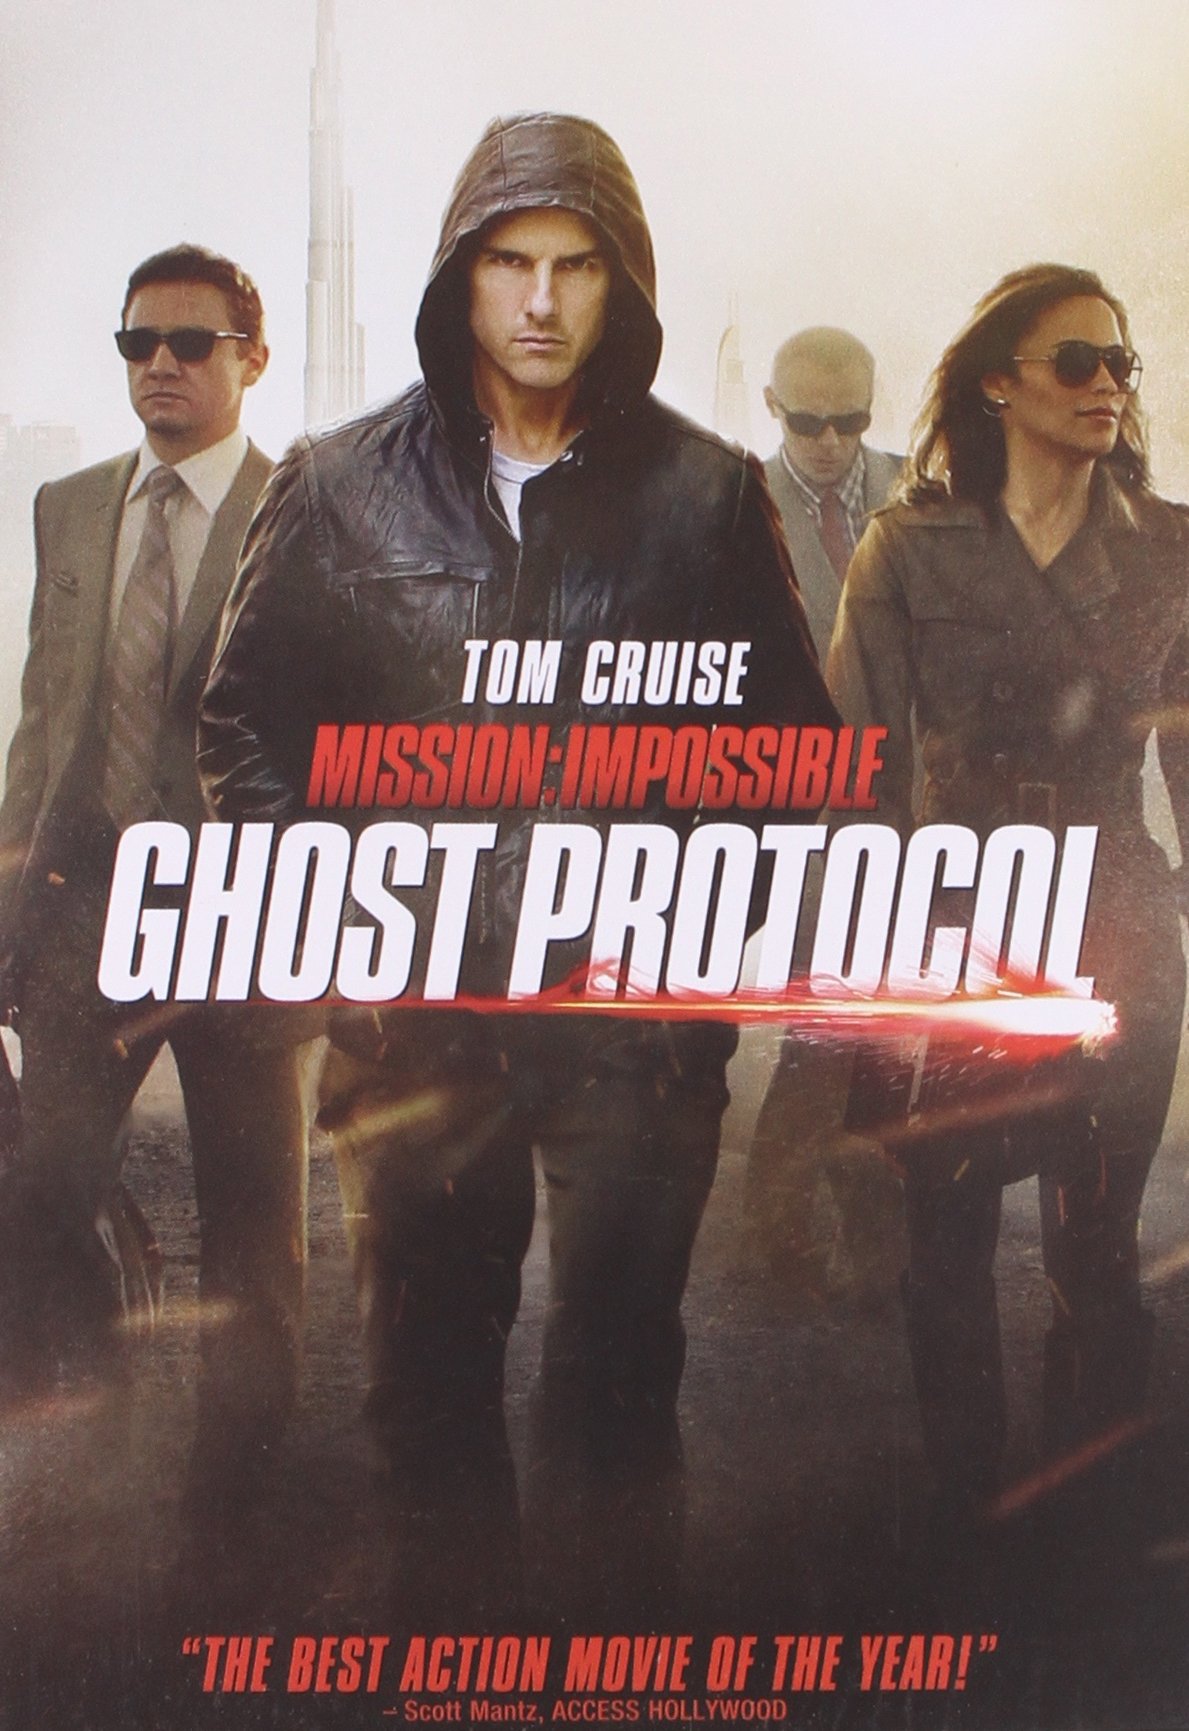 mission-impossible-ghost-protocol-movie-purchase-or-watch-online